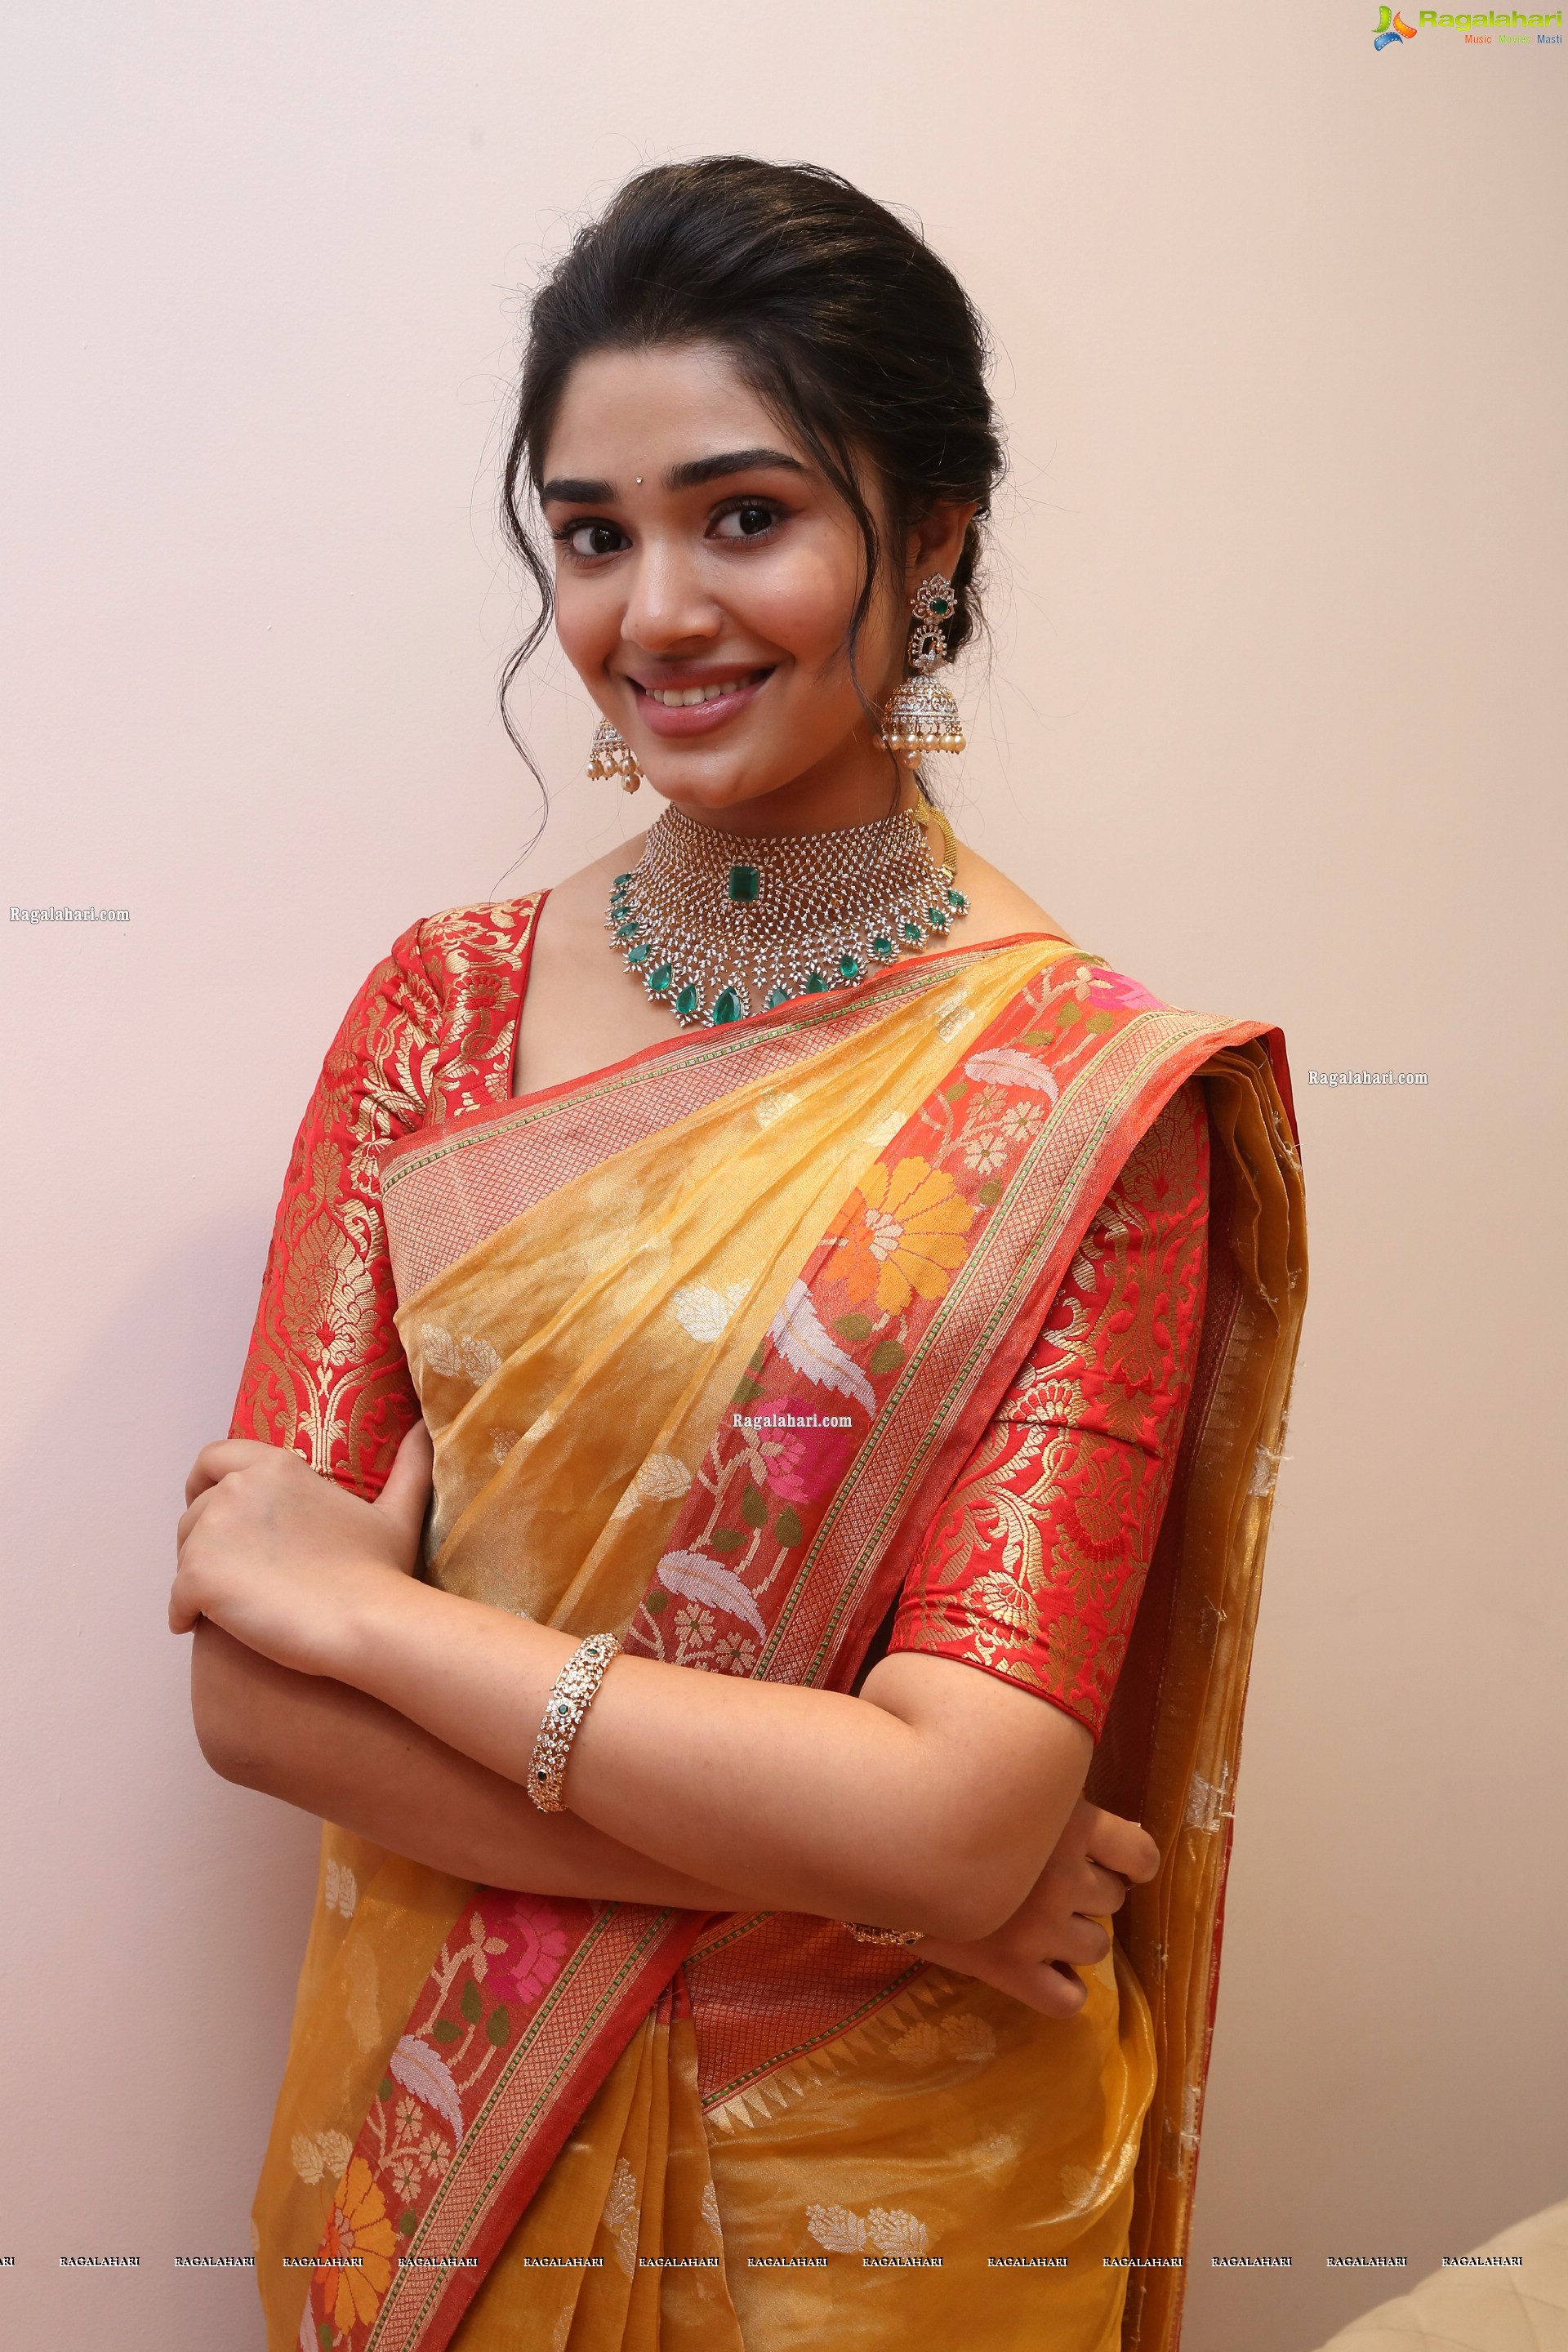 Krithi Shetty in Traditional Jewellery, HD Photo Gallery